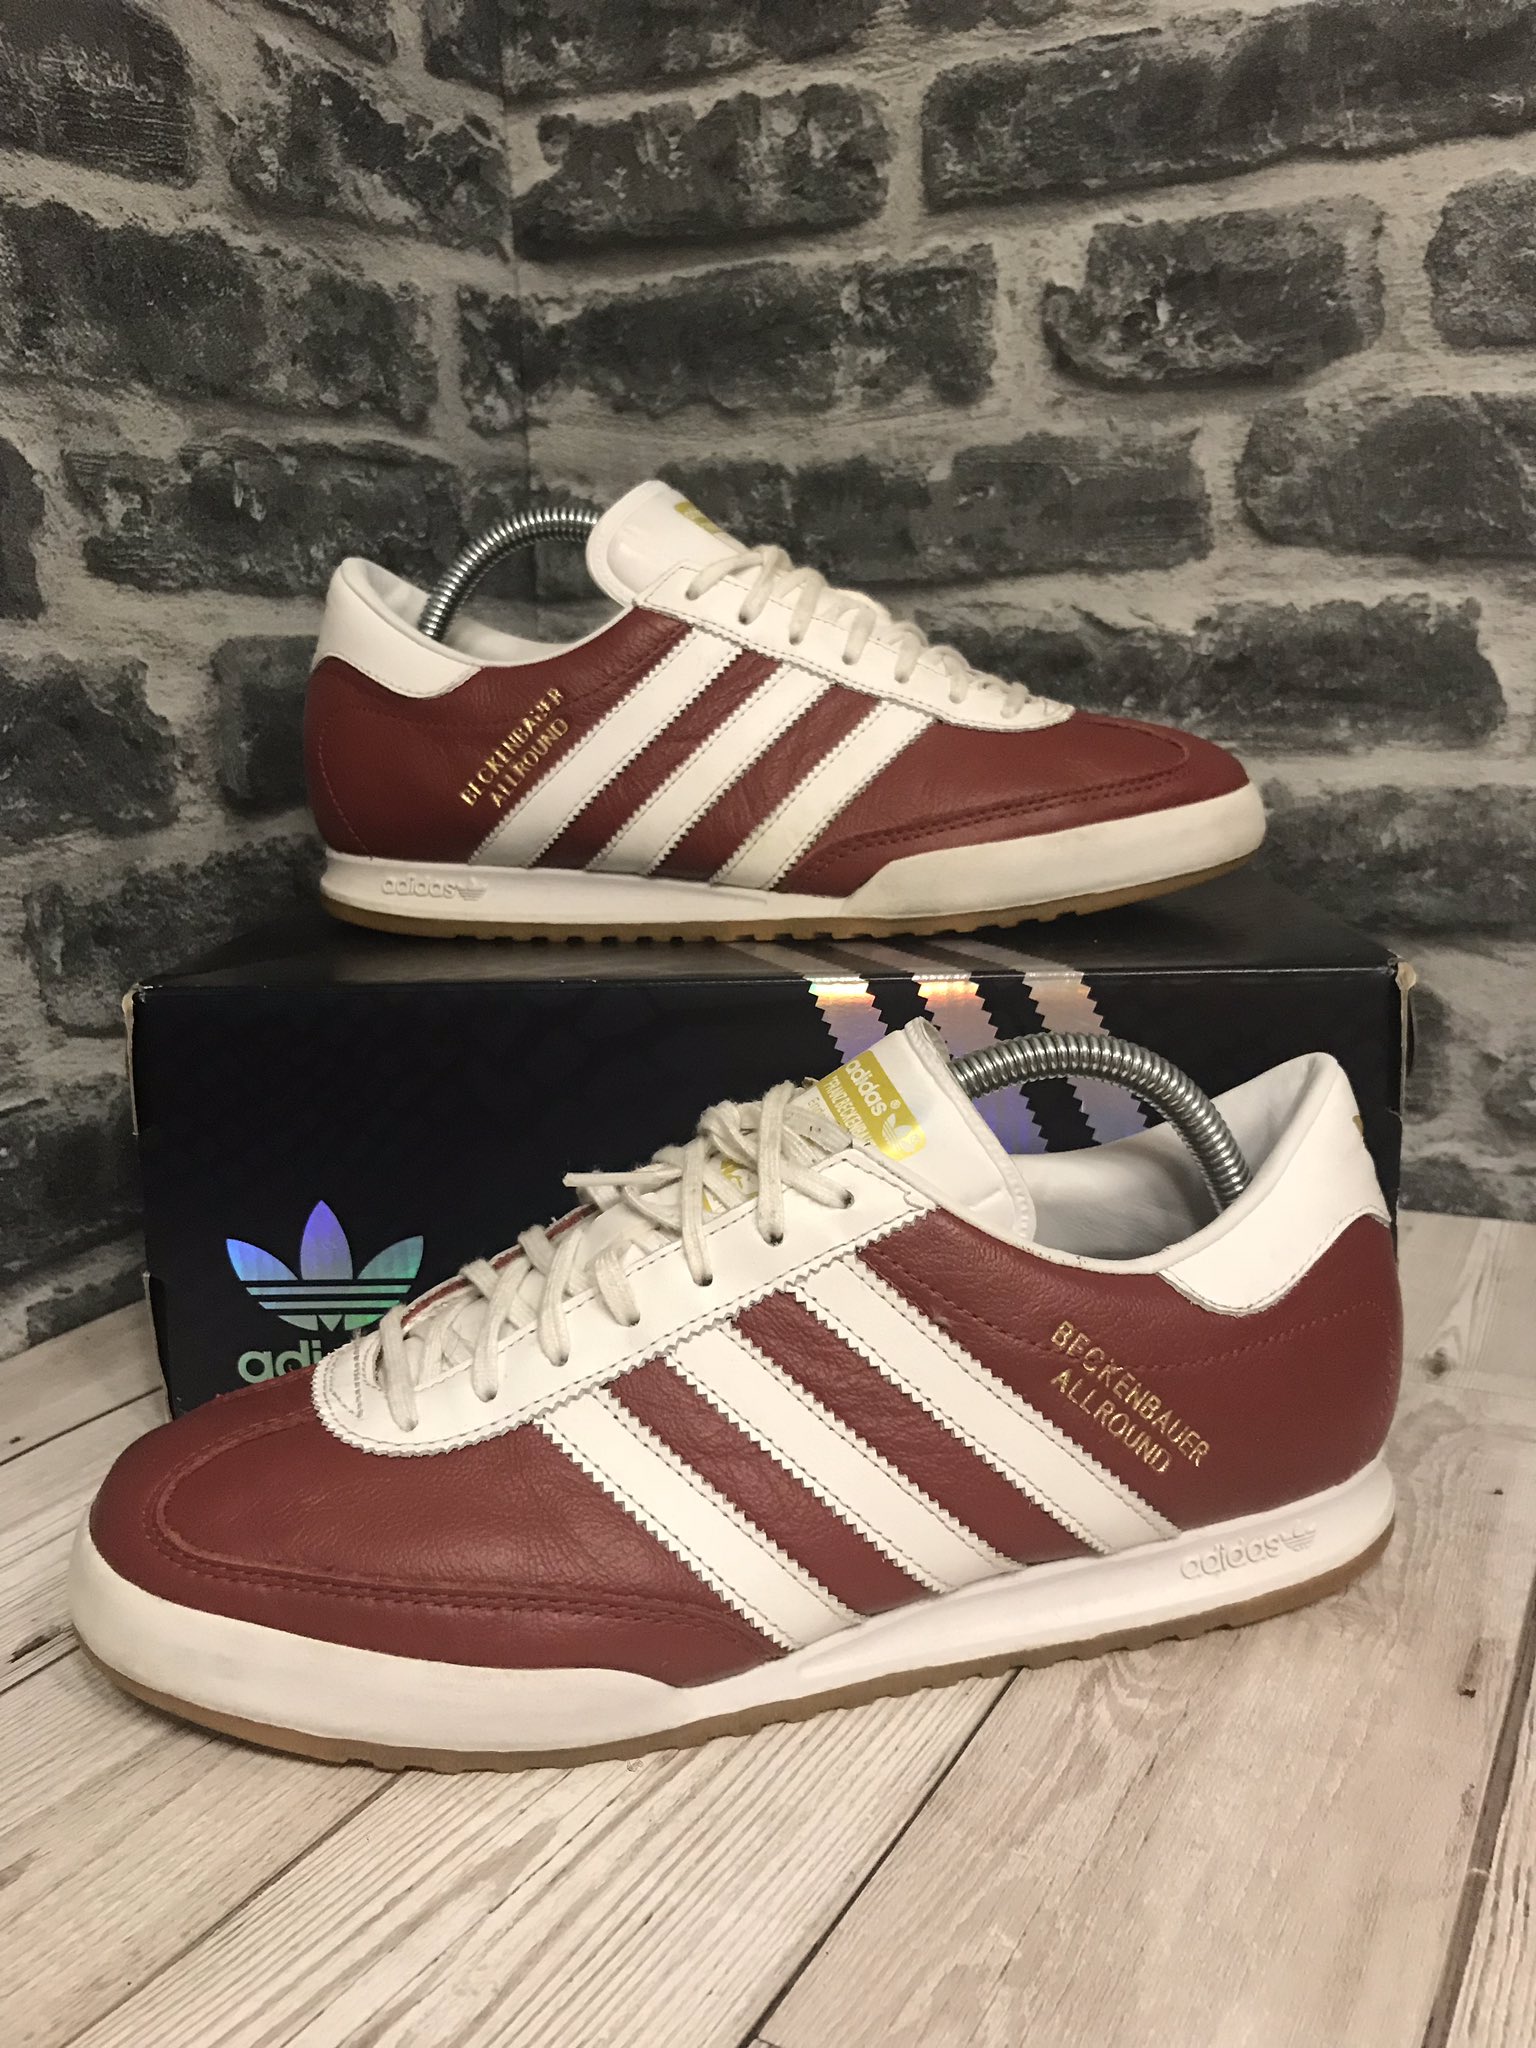 Retro Soles on Twitter: "FOR SALE:- #adidas #beckenbauer UK 8 2014 release Red White Leather CW Rare 8/10 Pre Worn £60 DELIVERED RT Appreciated DM me if you are interested /// #